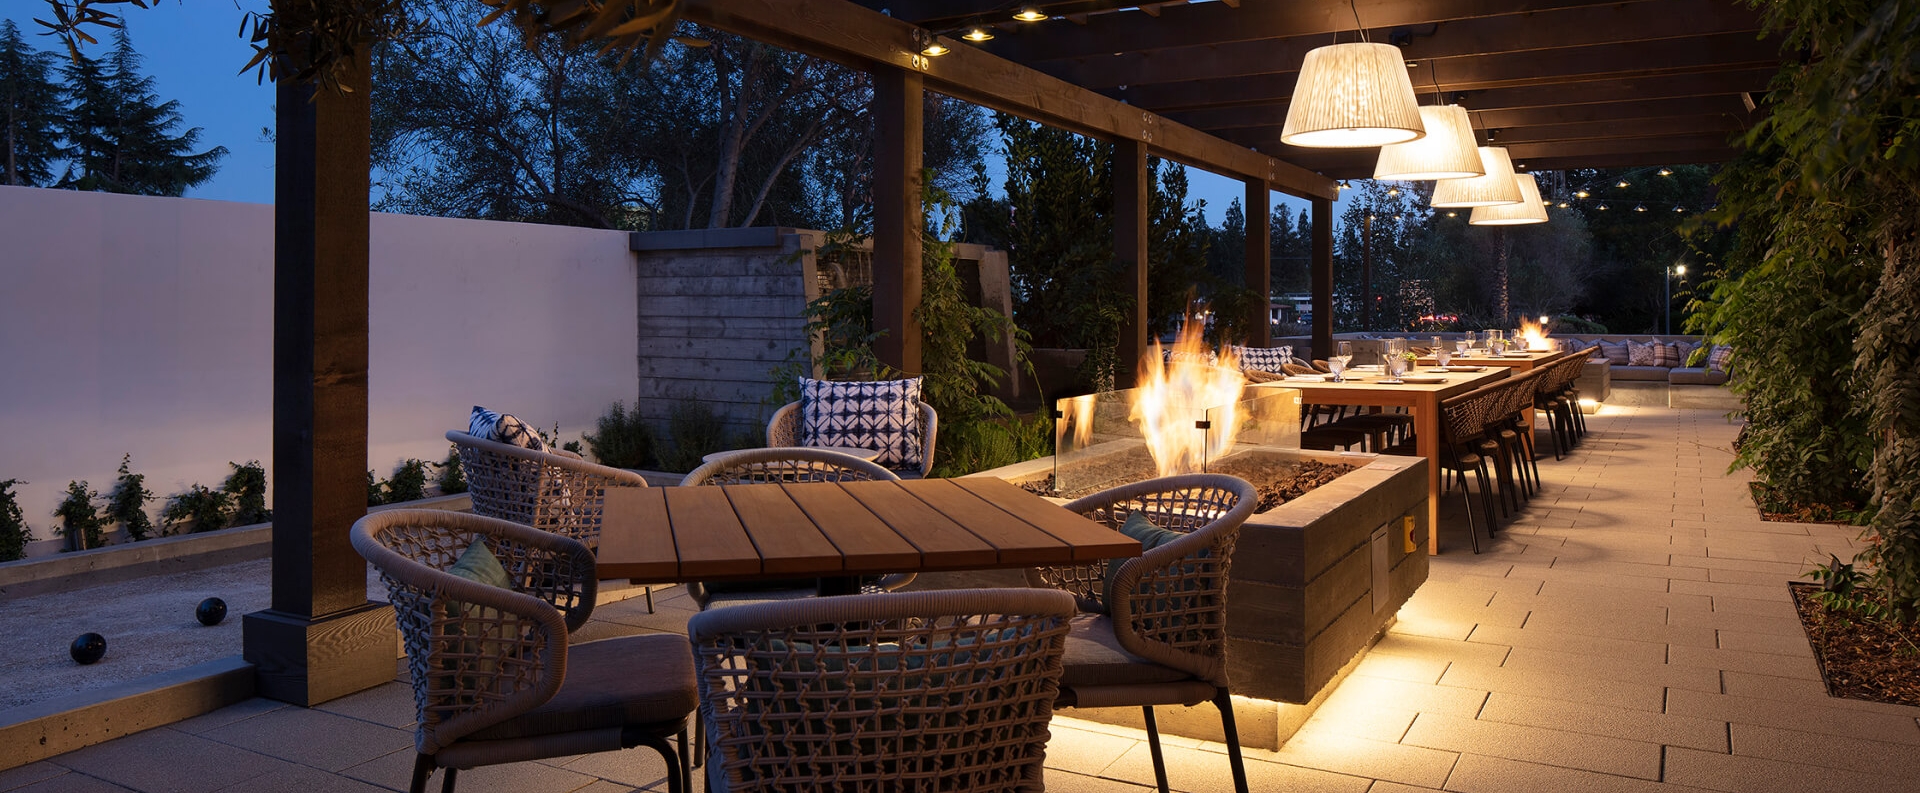 The outdoor seating and fire pit at Wit and Wisdom